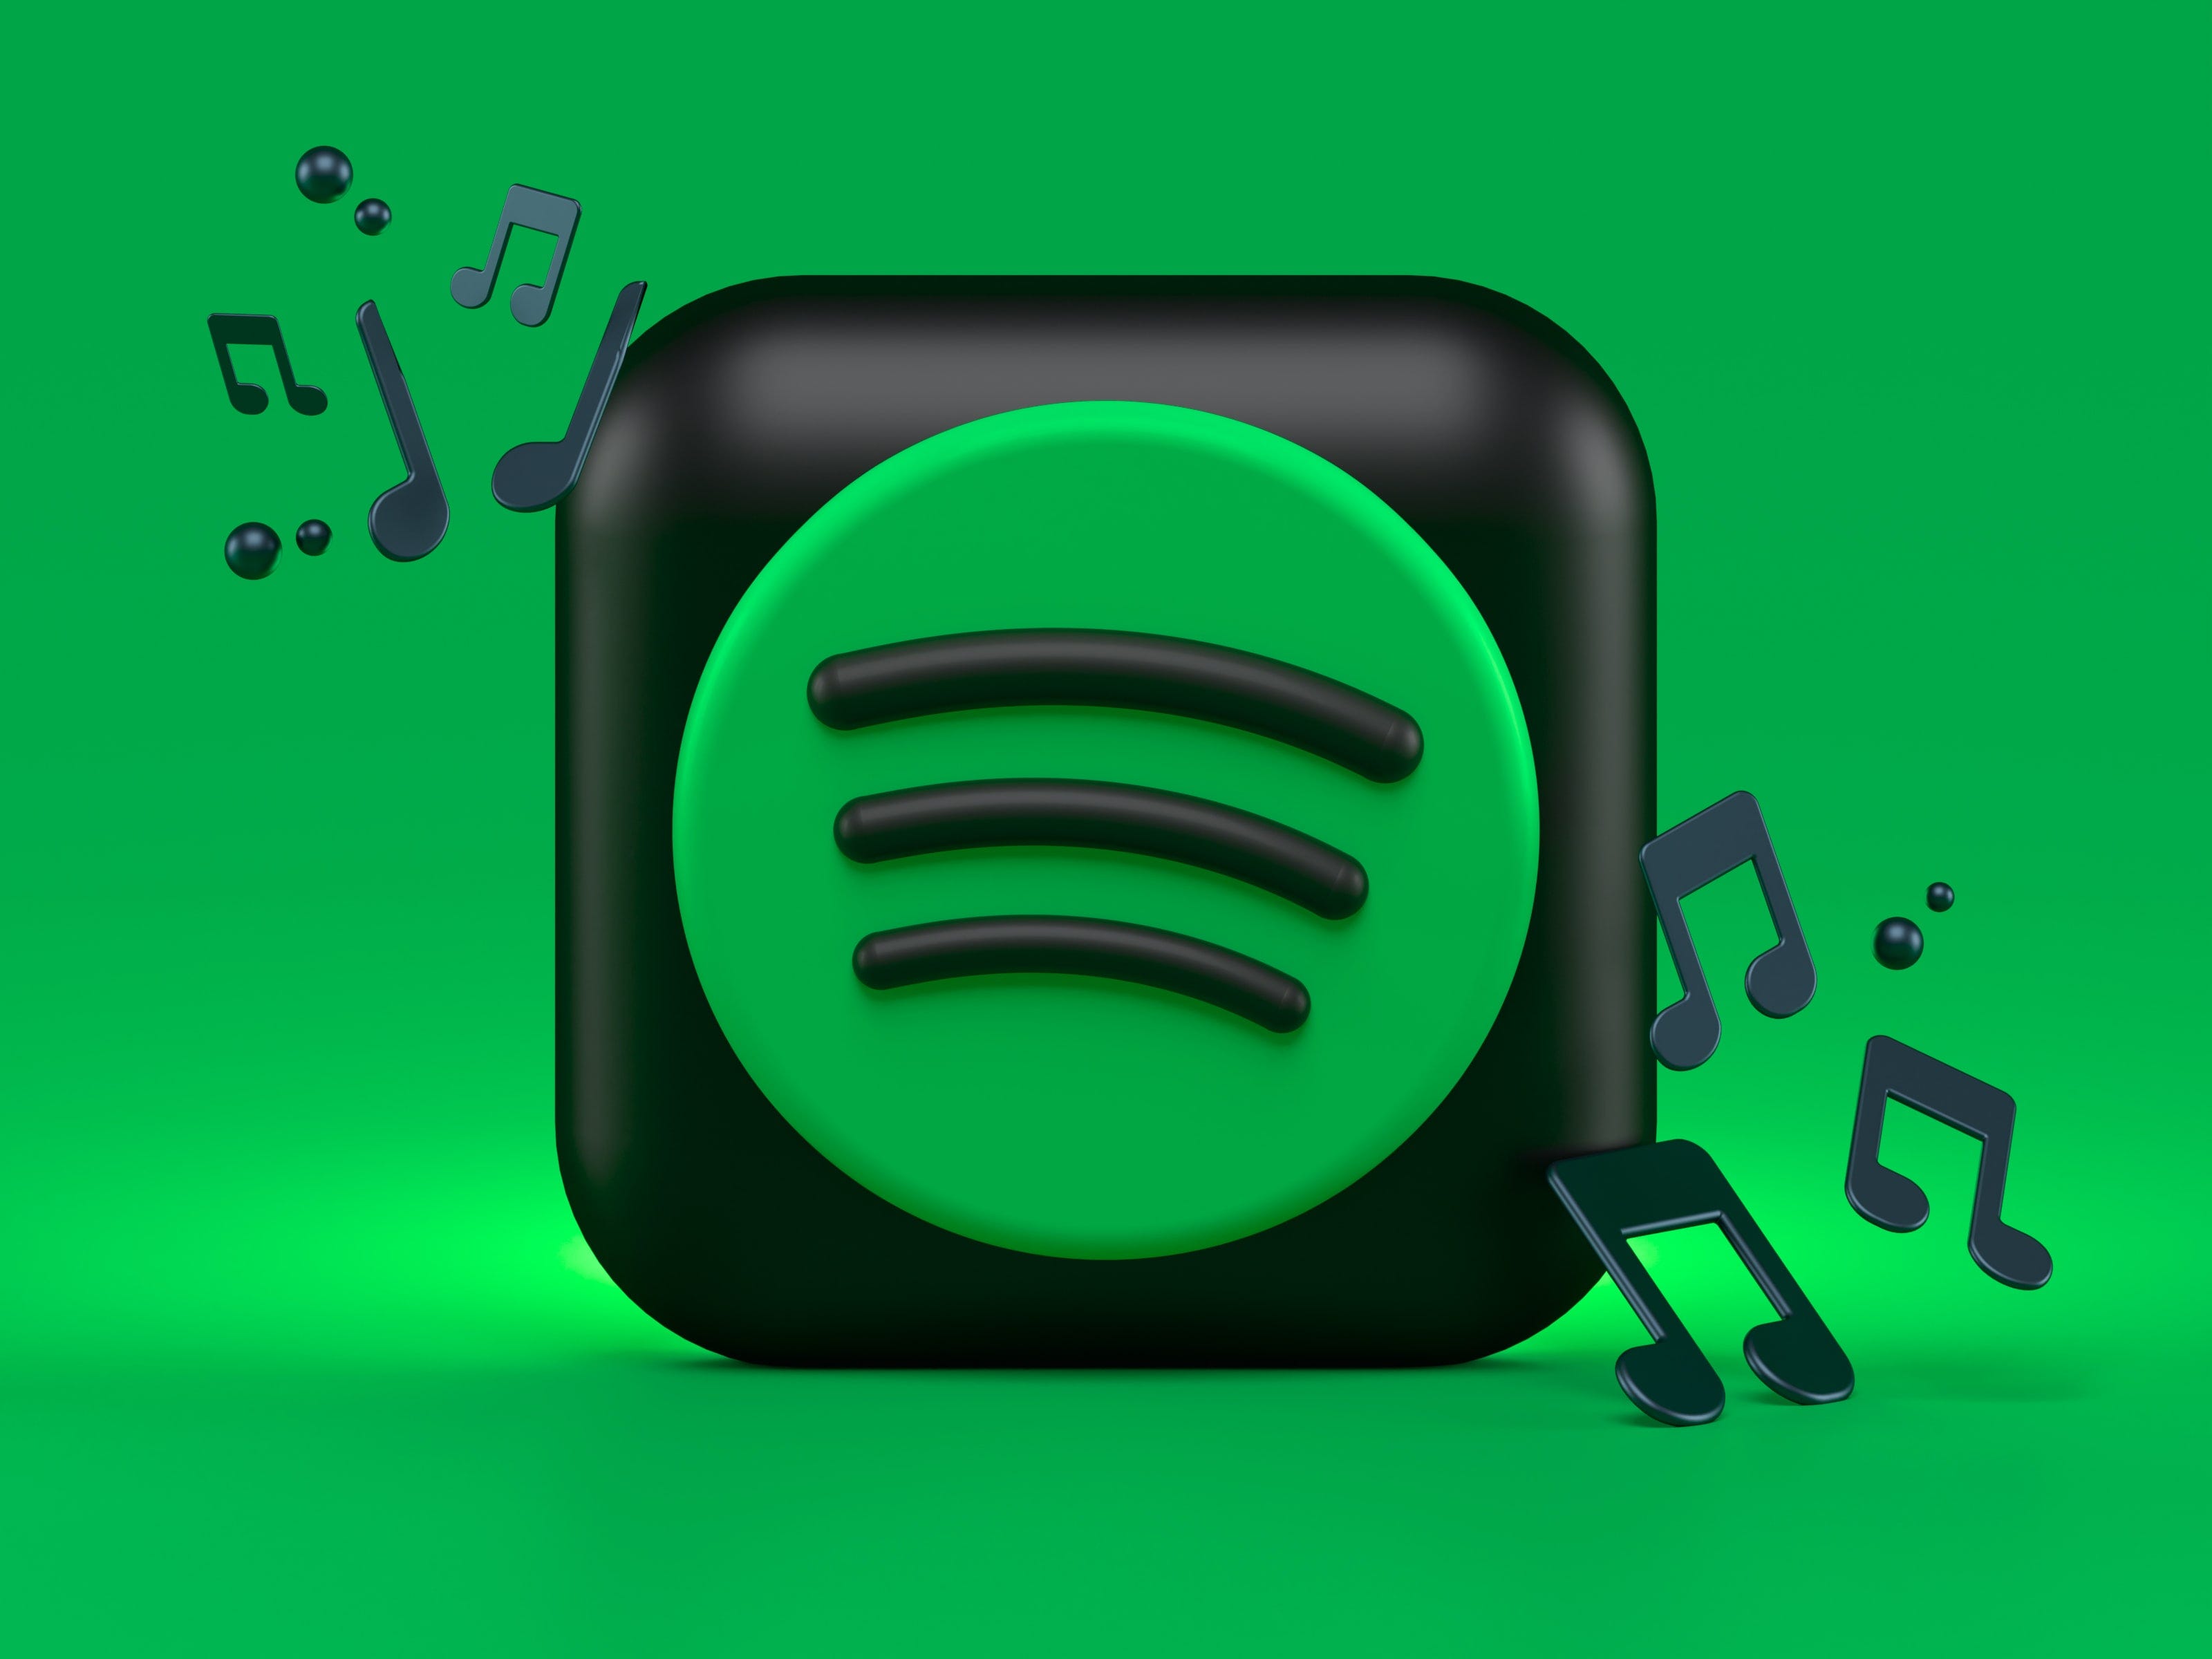 Bringing the Spotify Heart to Life